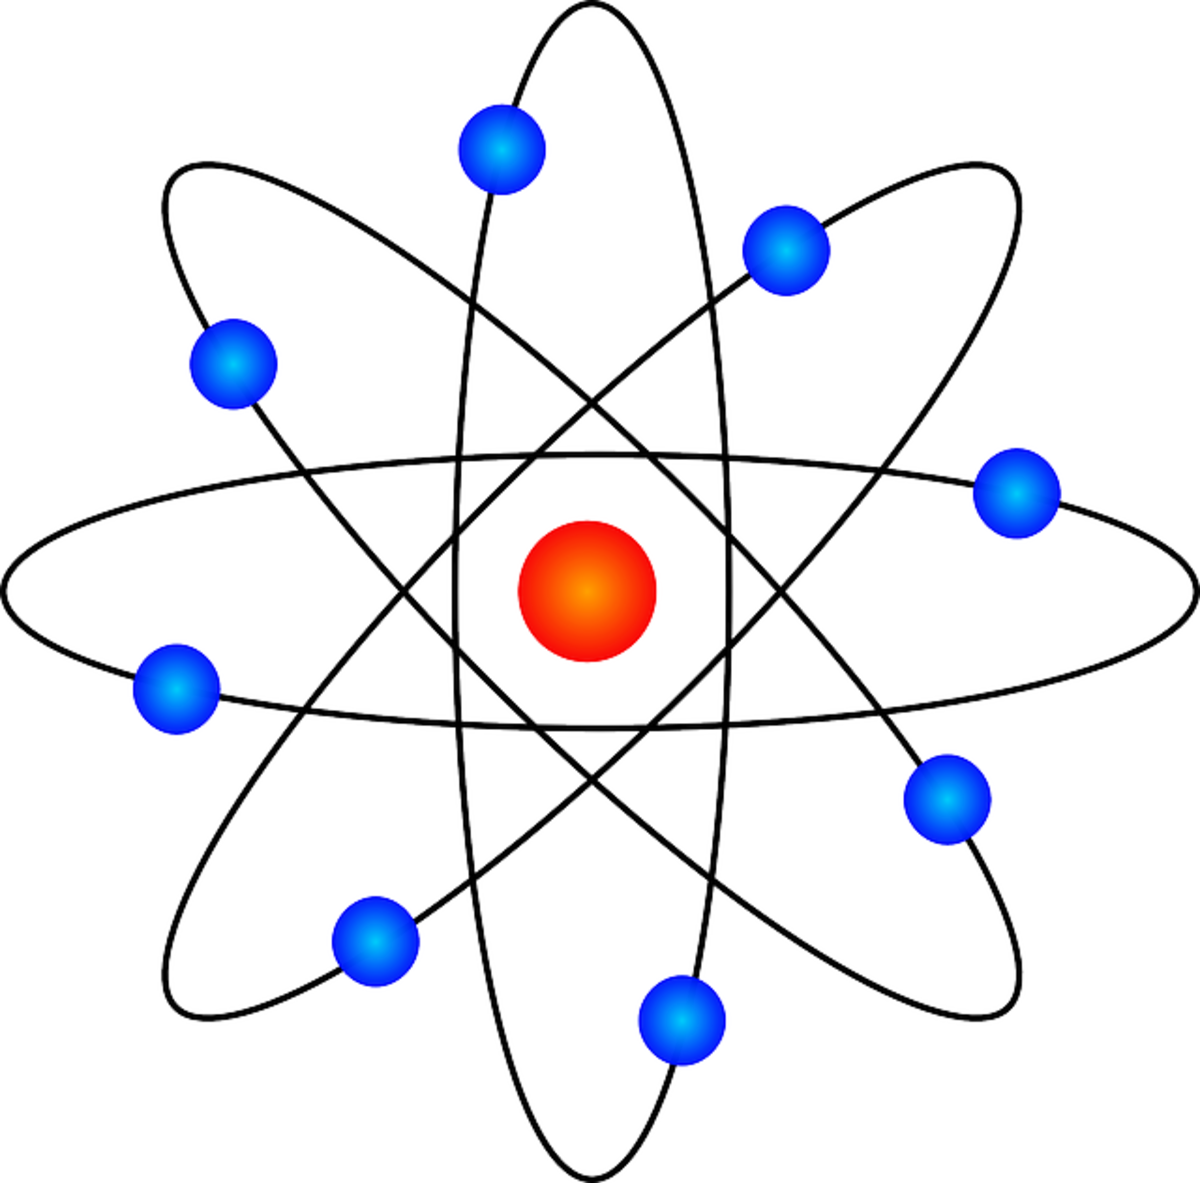 Learn About Atoms and Molecules for Kids